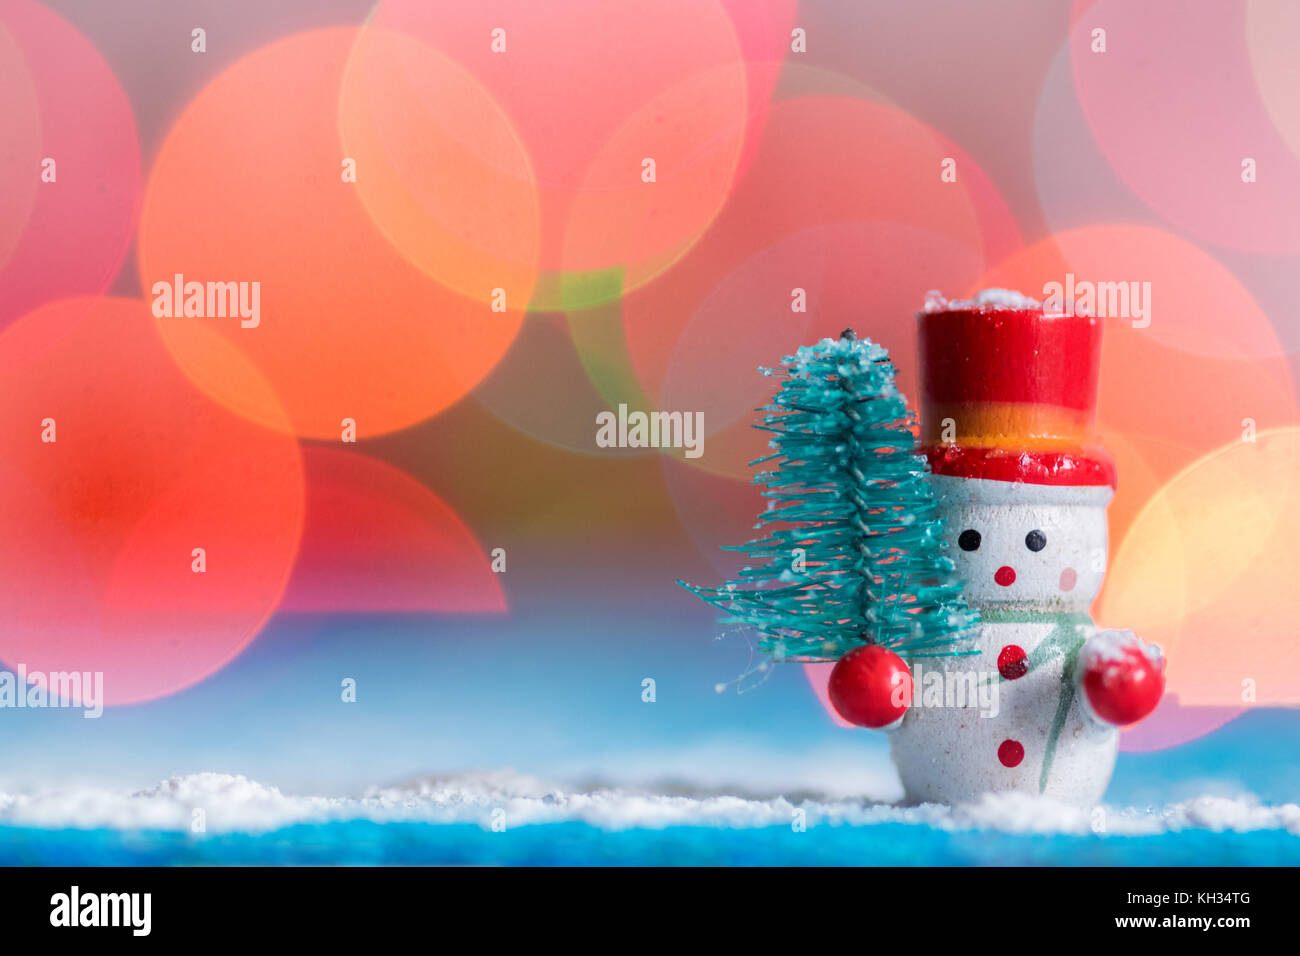 Snowman christmas decoration holding a small pine tree, snow on a blue wood surface, with background colorful bokeh lights, blue and cold tint Stock Photo